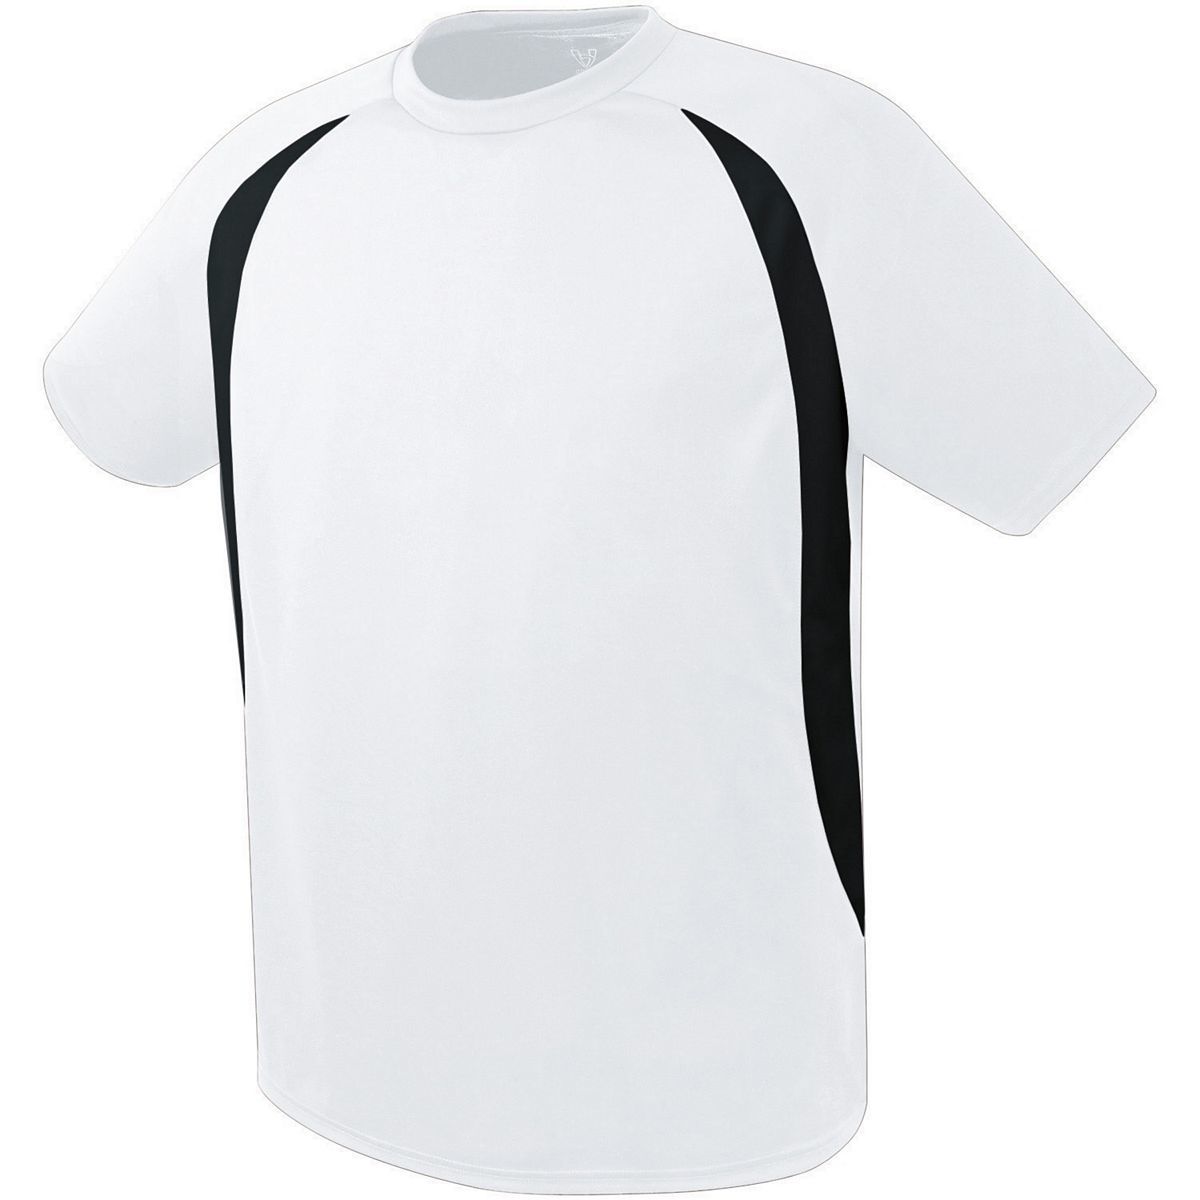 High 5 Liberty  Soccer Jersey in White/Black  -Part of the Adult, Adult-Jersey, High5-Products, Soccer, Shirts, All-Sports-1 product lines at KanaleyCreations.com